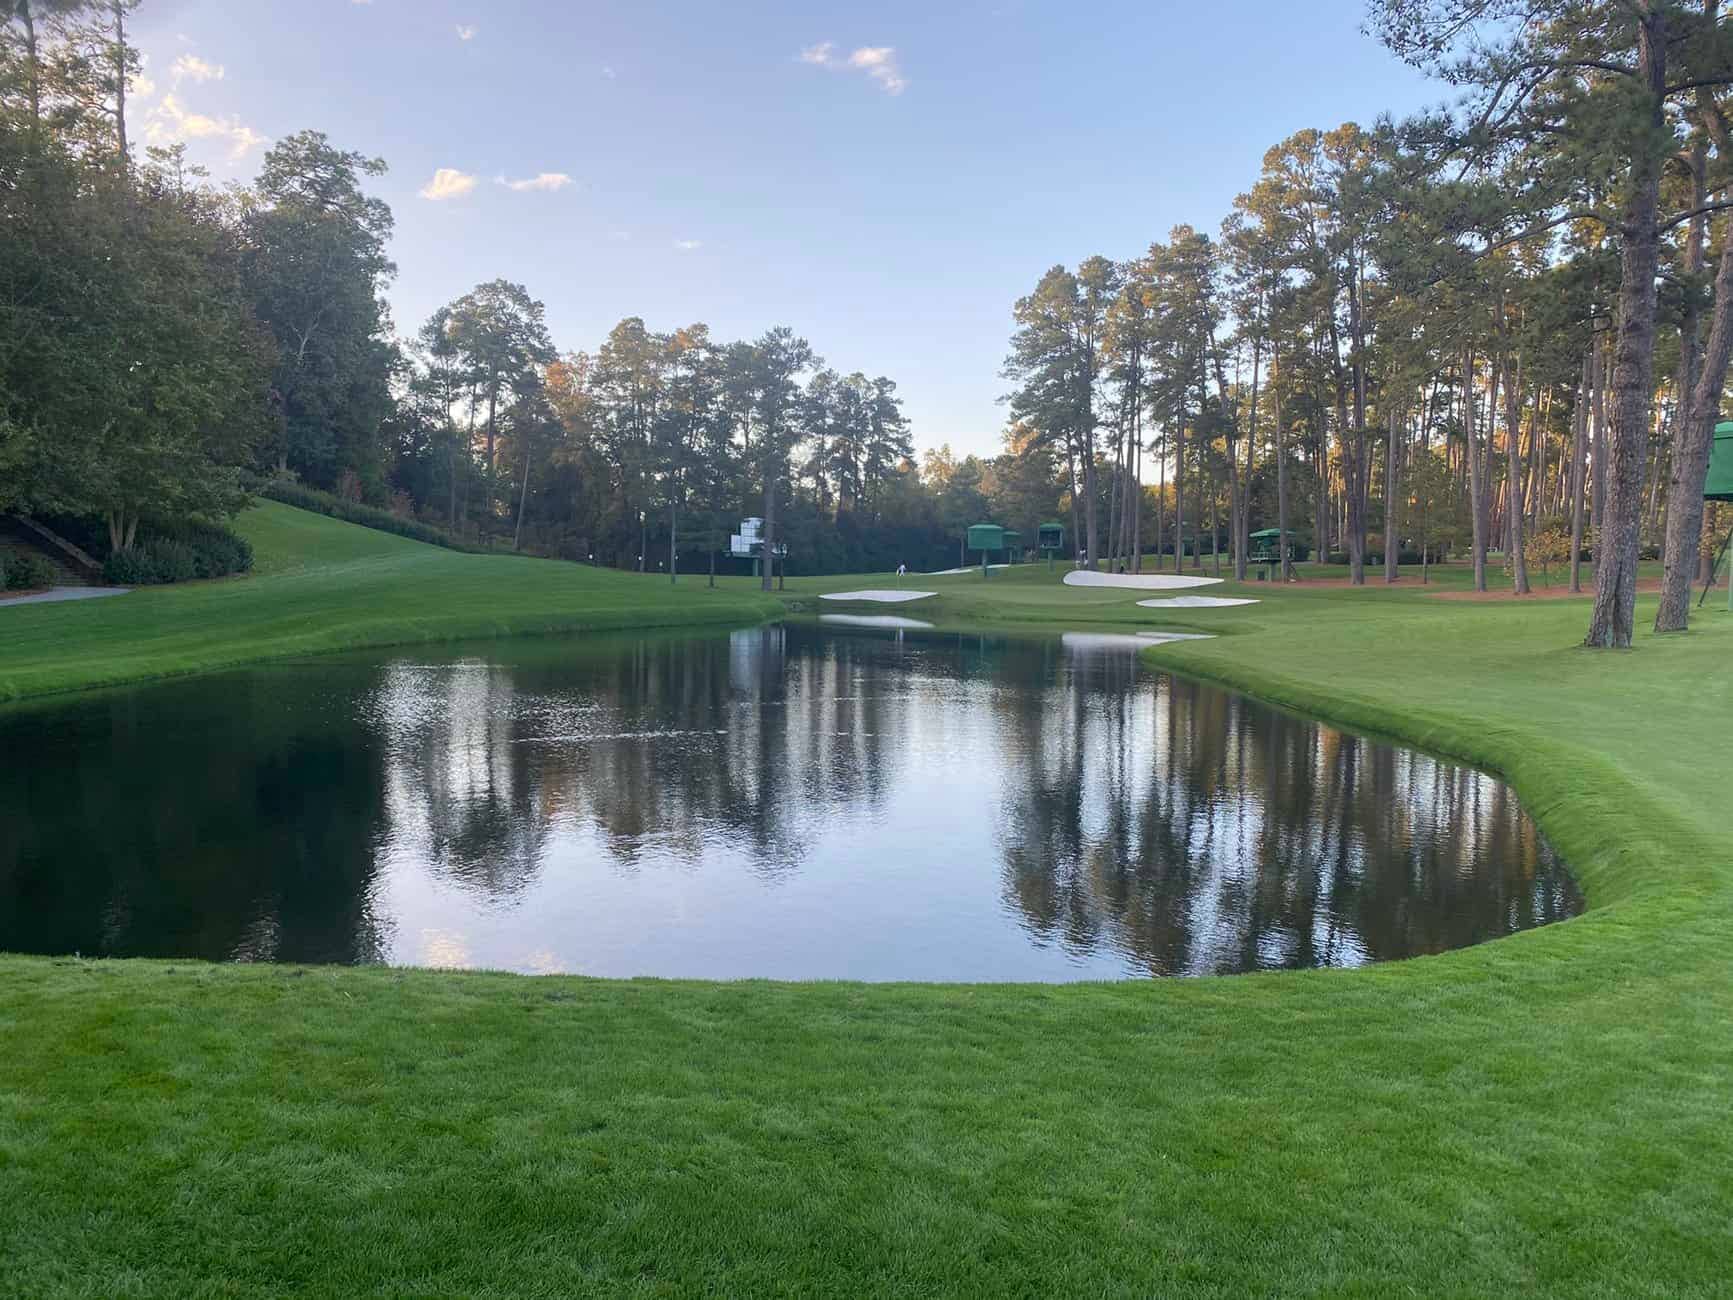 The 16th at Augusta